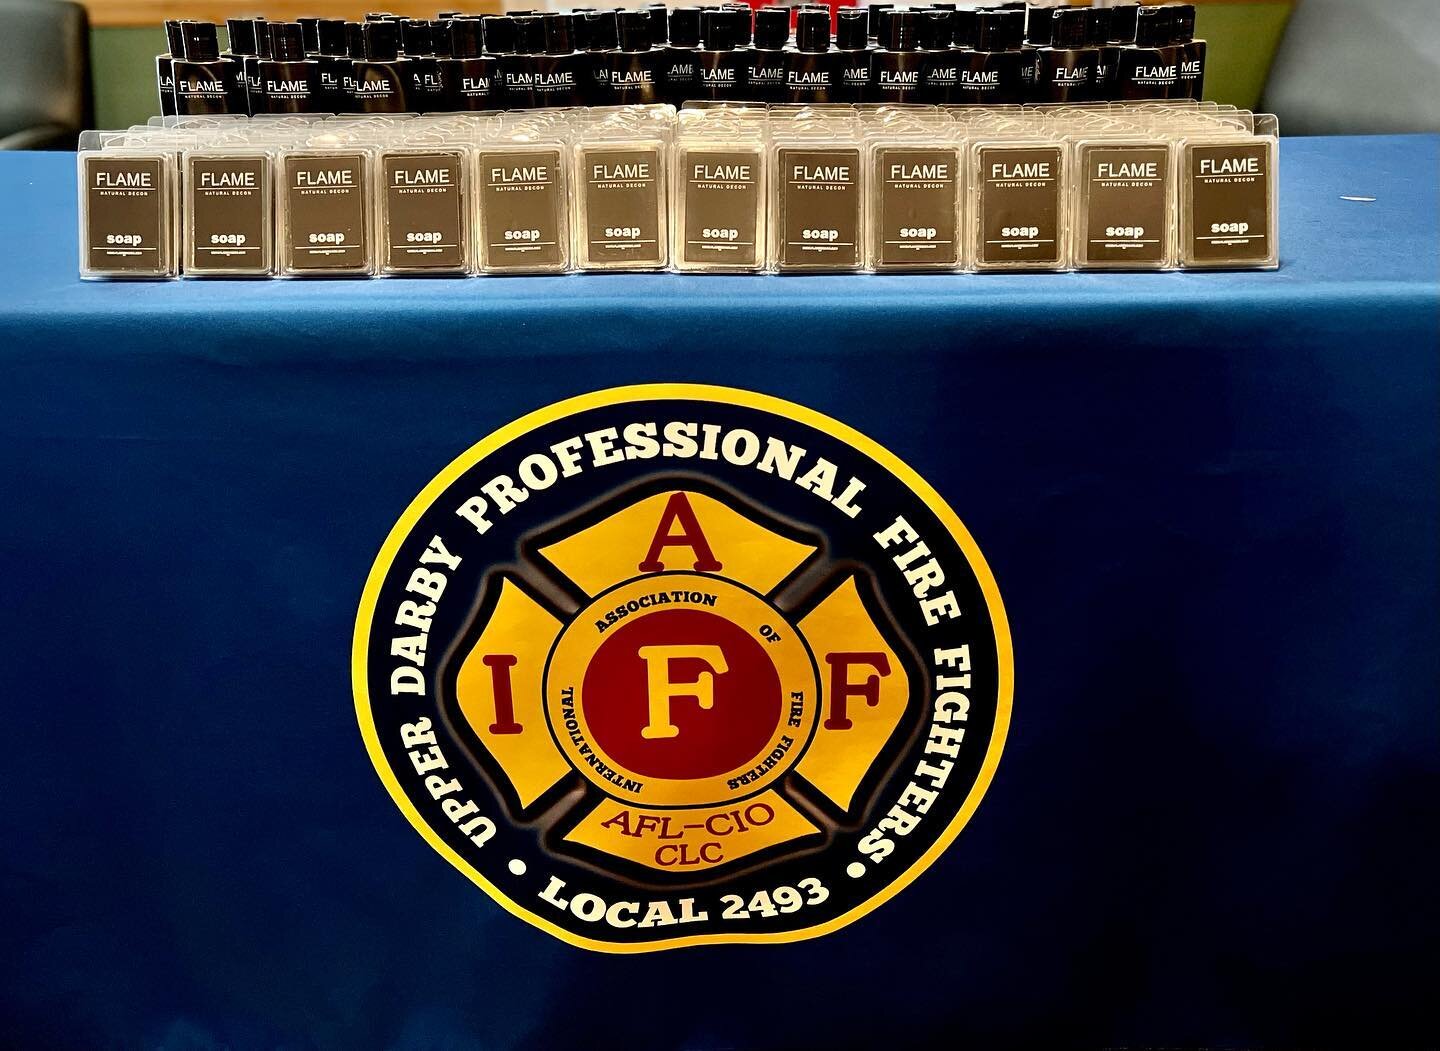 Members of the local would like to thank our Union Leaders and membership for approving the purchase of @flamedecon kits for each of our members. Firefighter TreDenick (37B) headed up the motion to purchase 60 combo kits. 

Flame Decon is a specializ